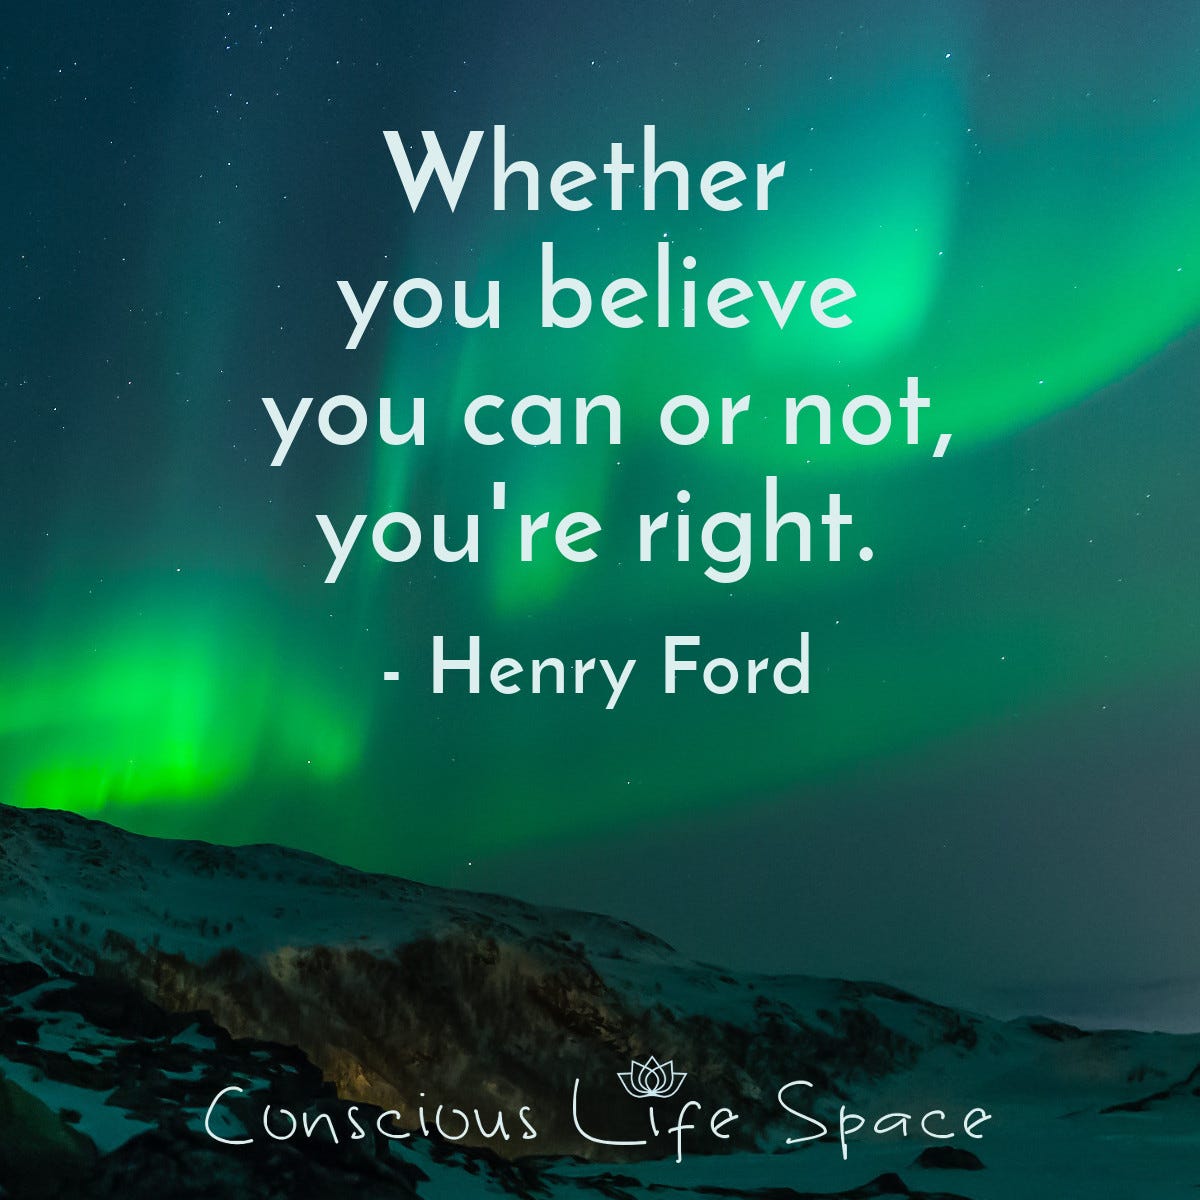 Whether you believe you can or not, you're right! - Henry Ford